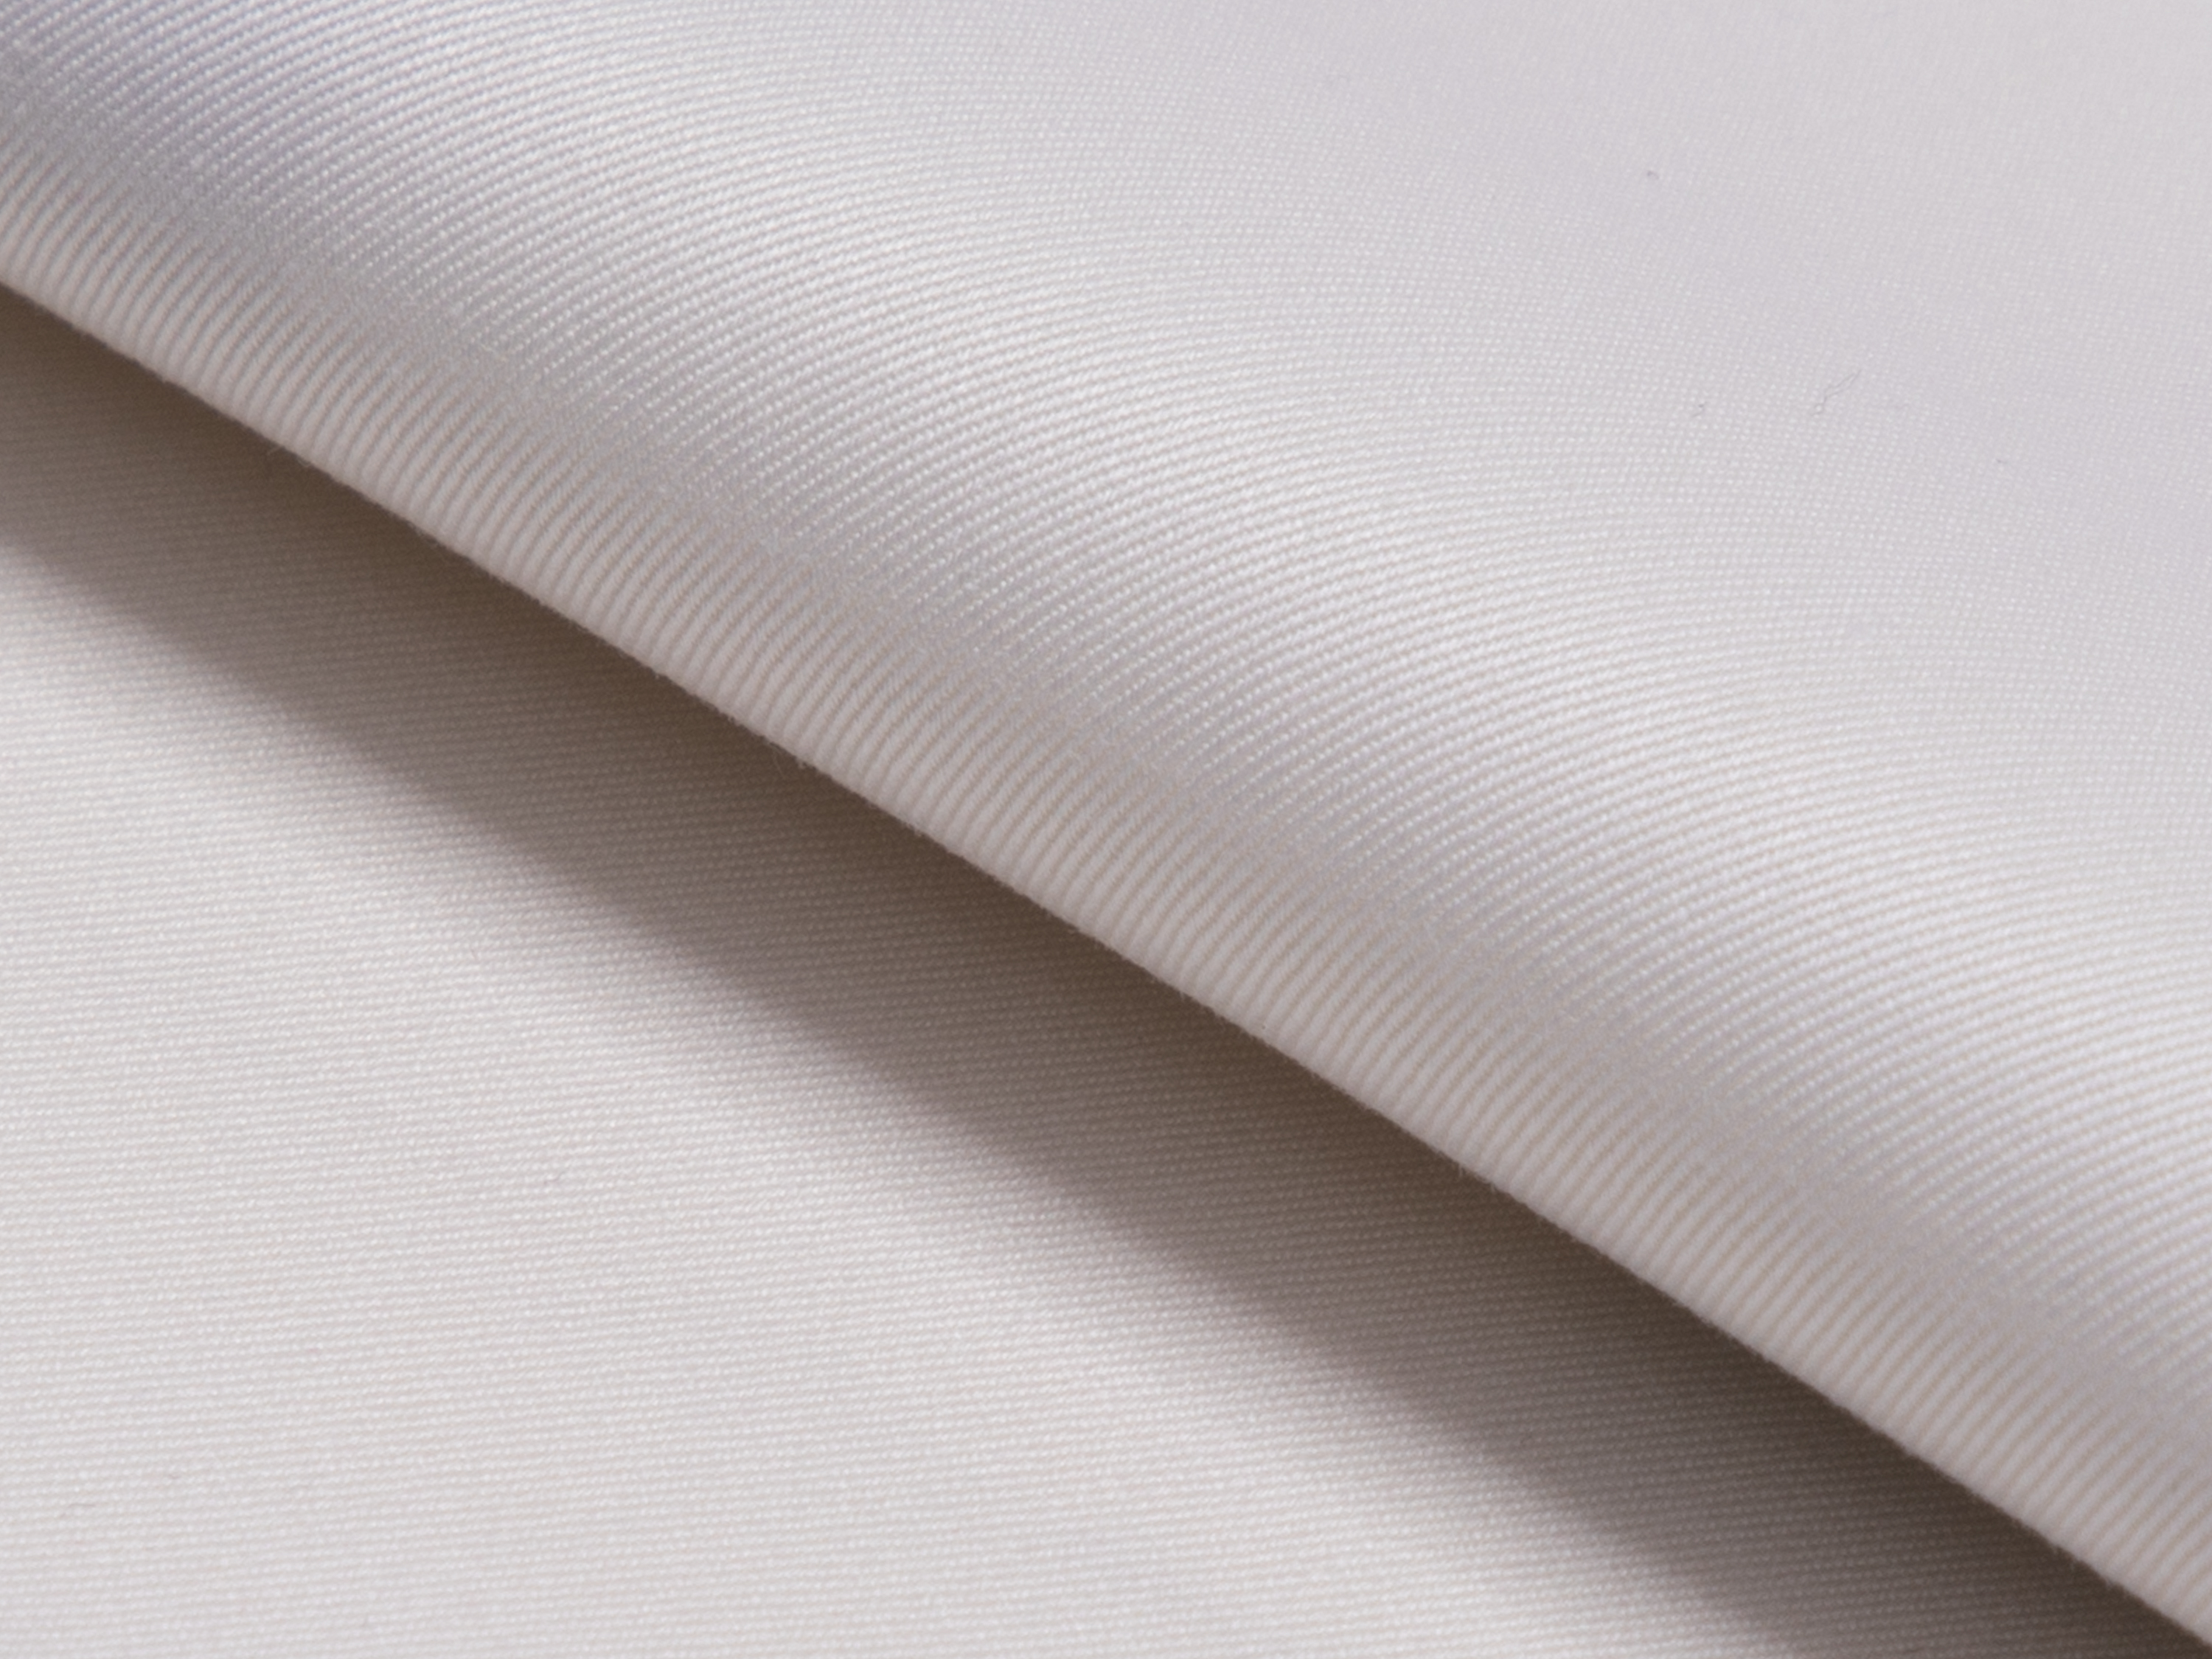 Buy tailor made shirts online - MAYFAIR - Twill Cream